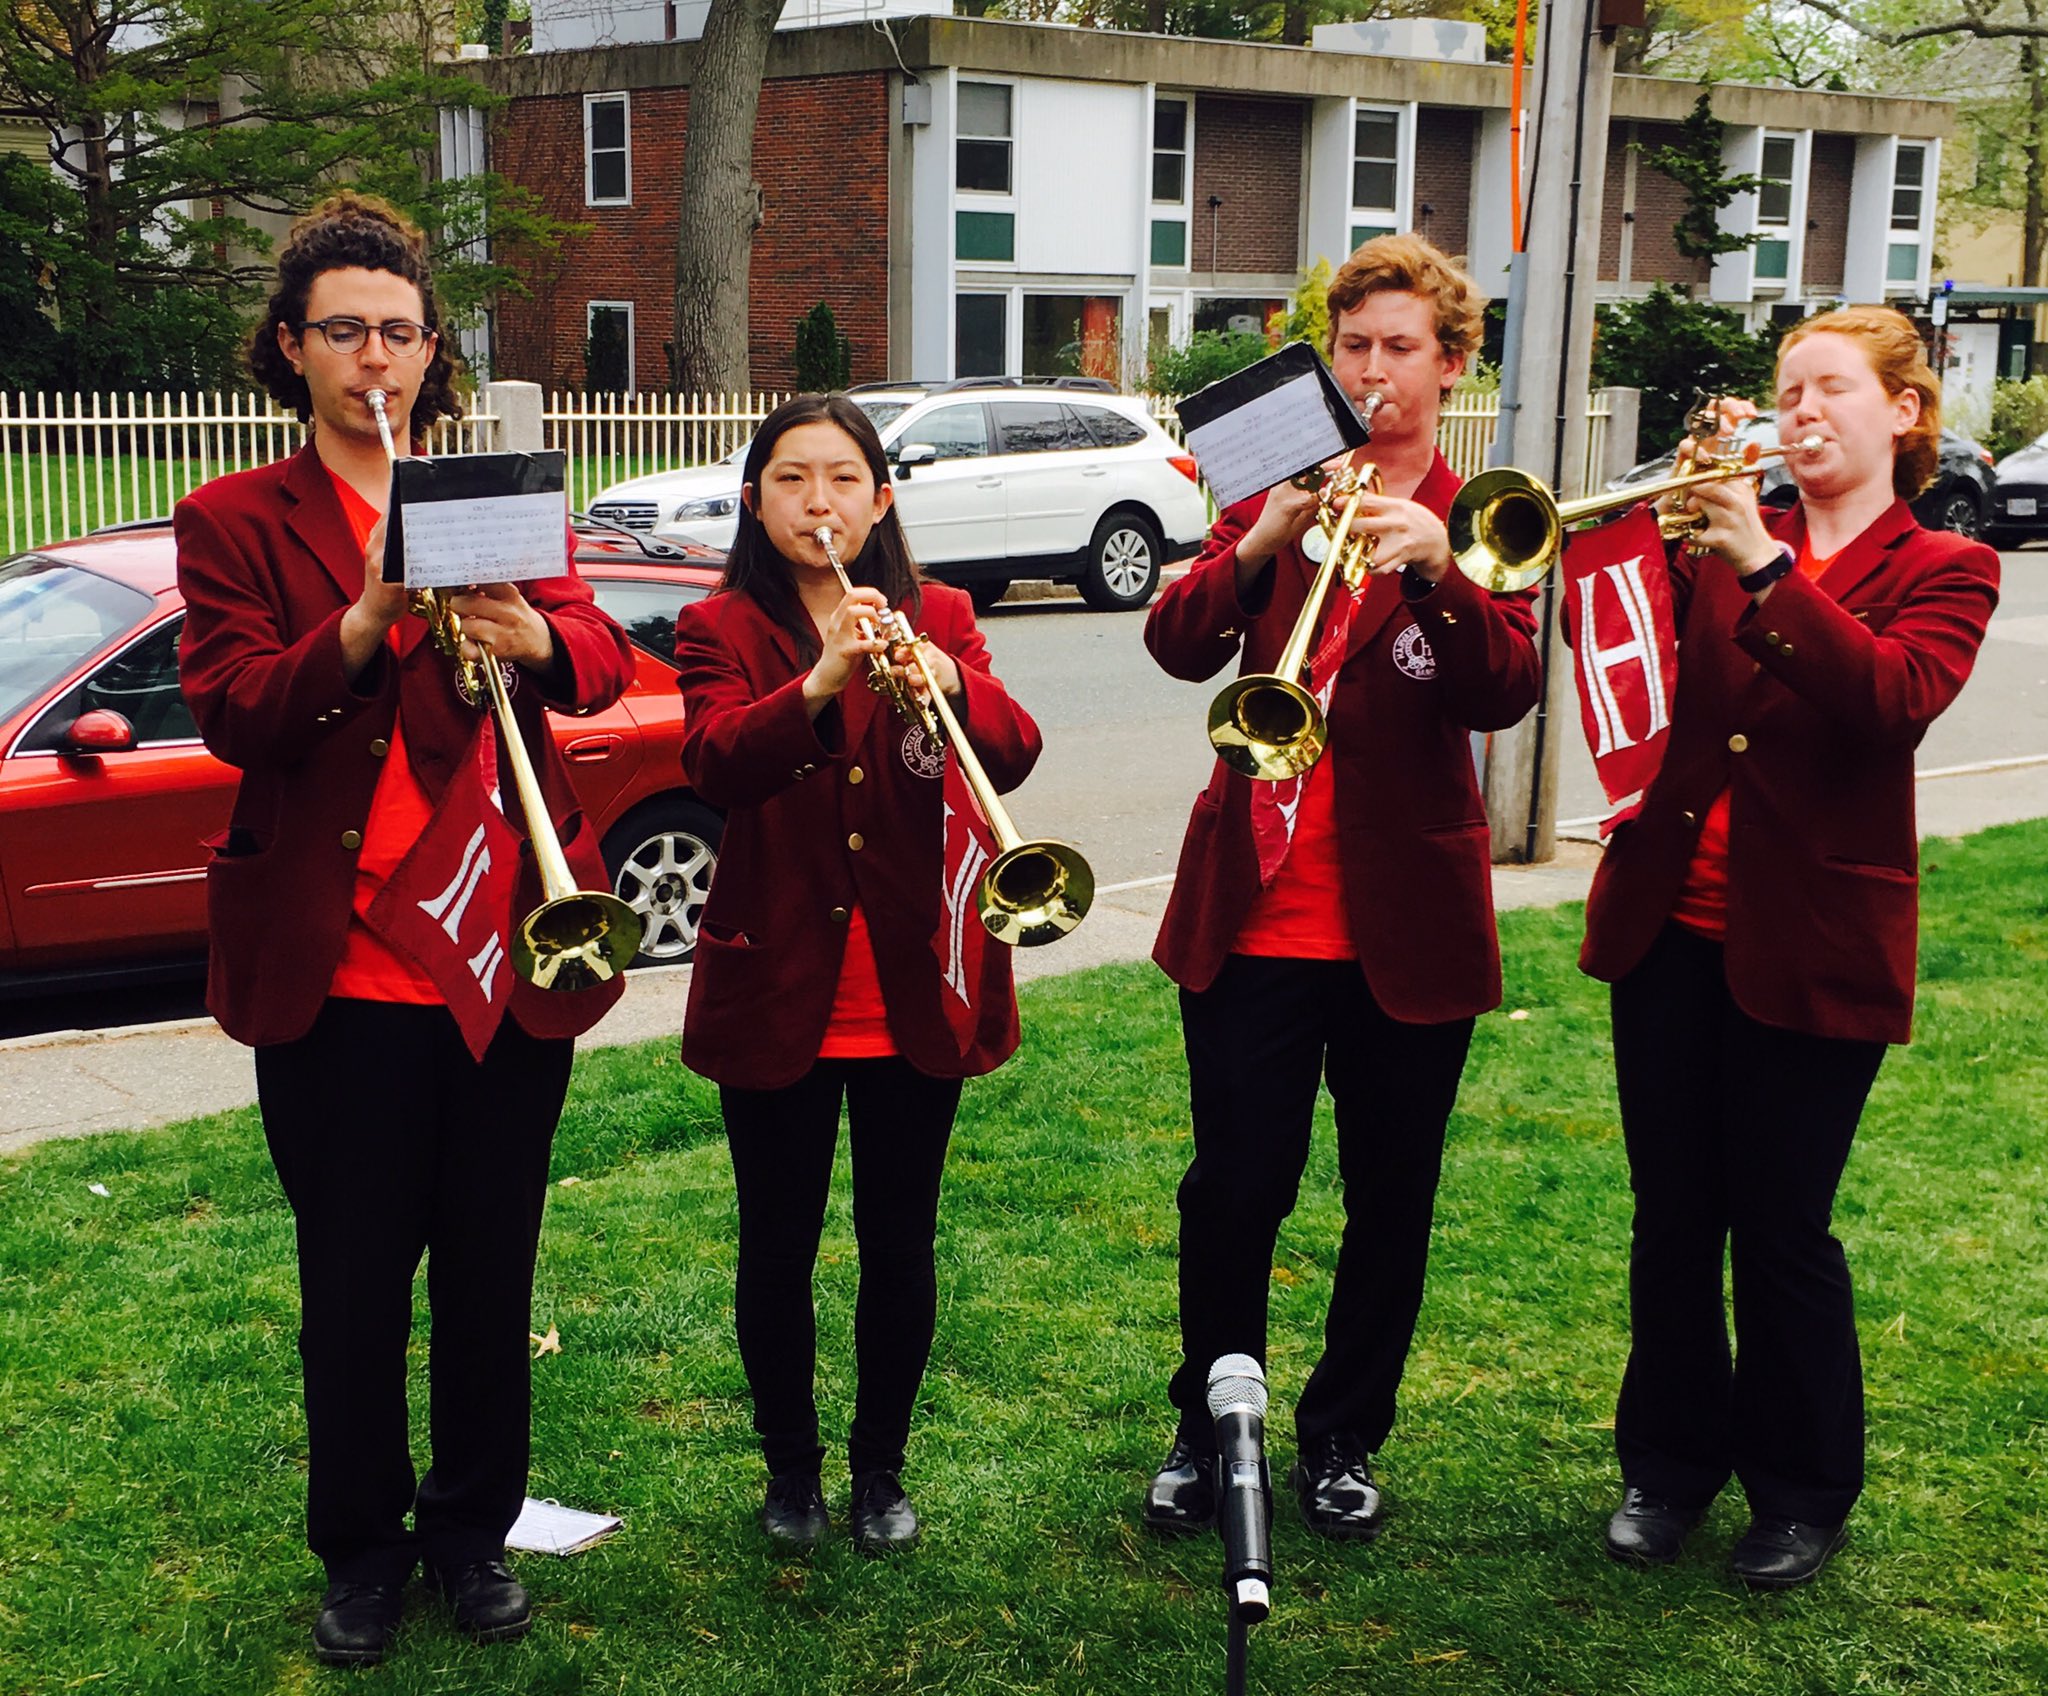 Harvard Herald Trumpeters at the Gomes Honors Ceremony #HDS200 https://t.co/LgTjcD8d14